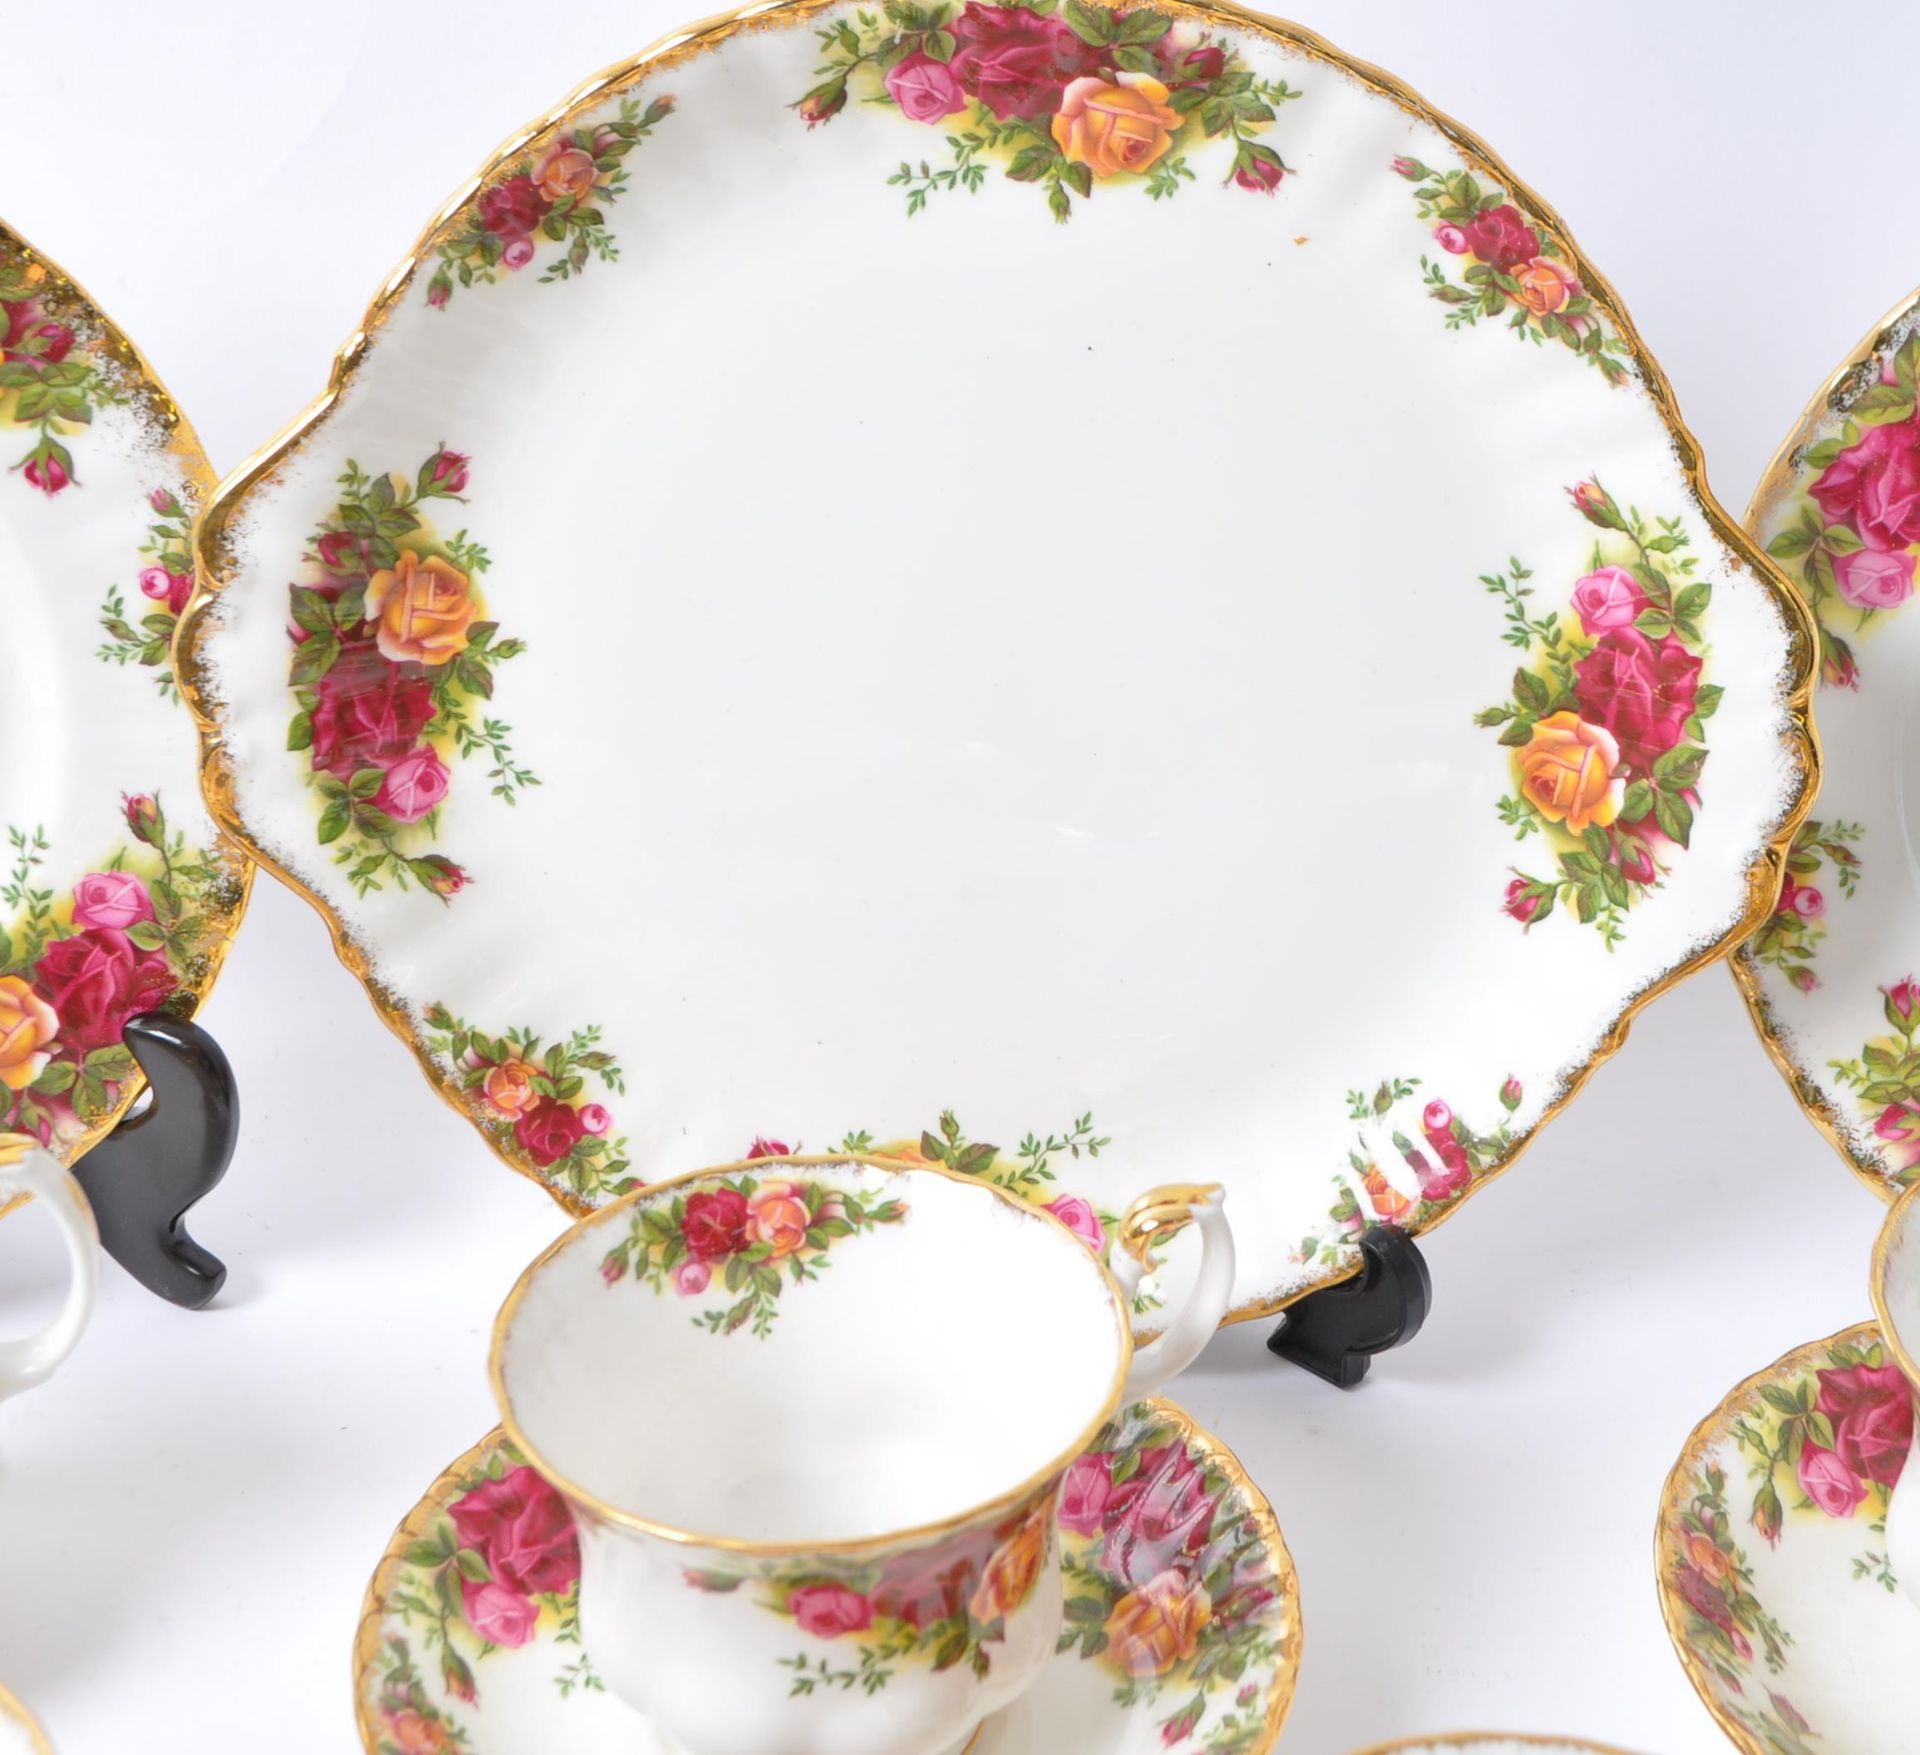 COLLECTION OF ROYAL ALBERT OLD COUNTRY ROSES TEA SET - Image 4 of 6